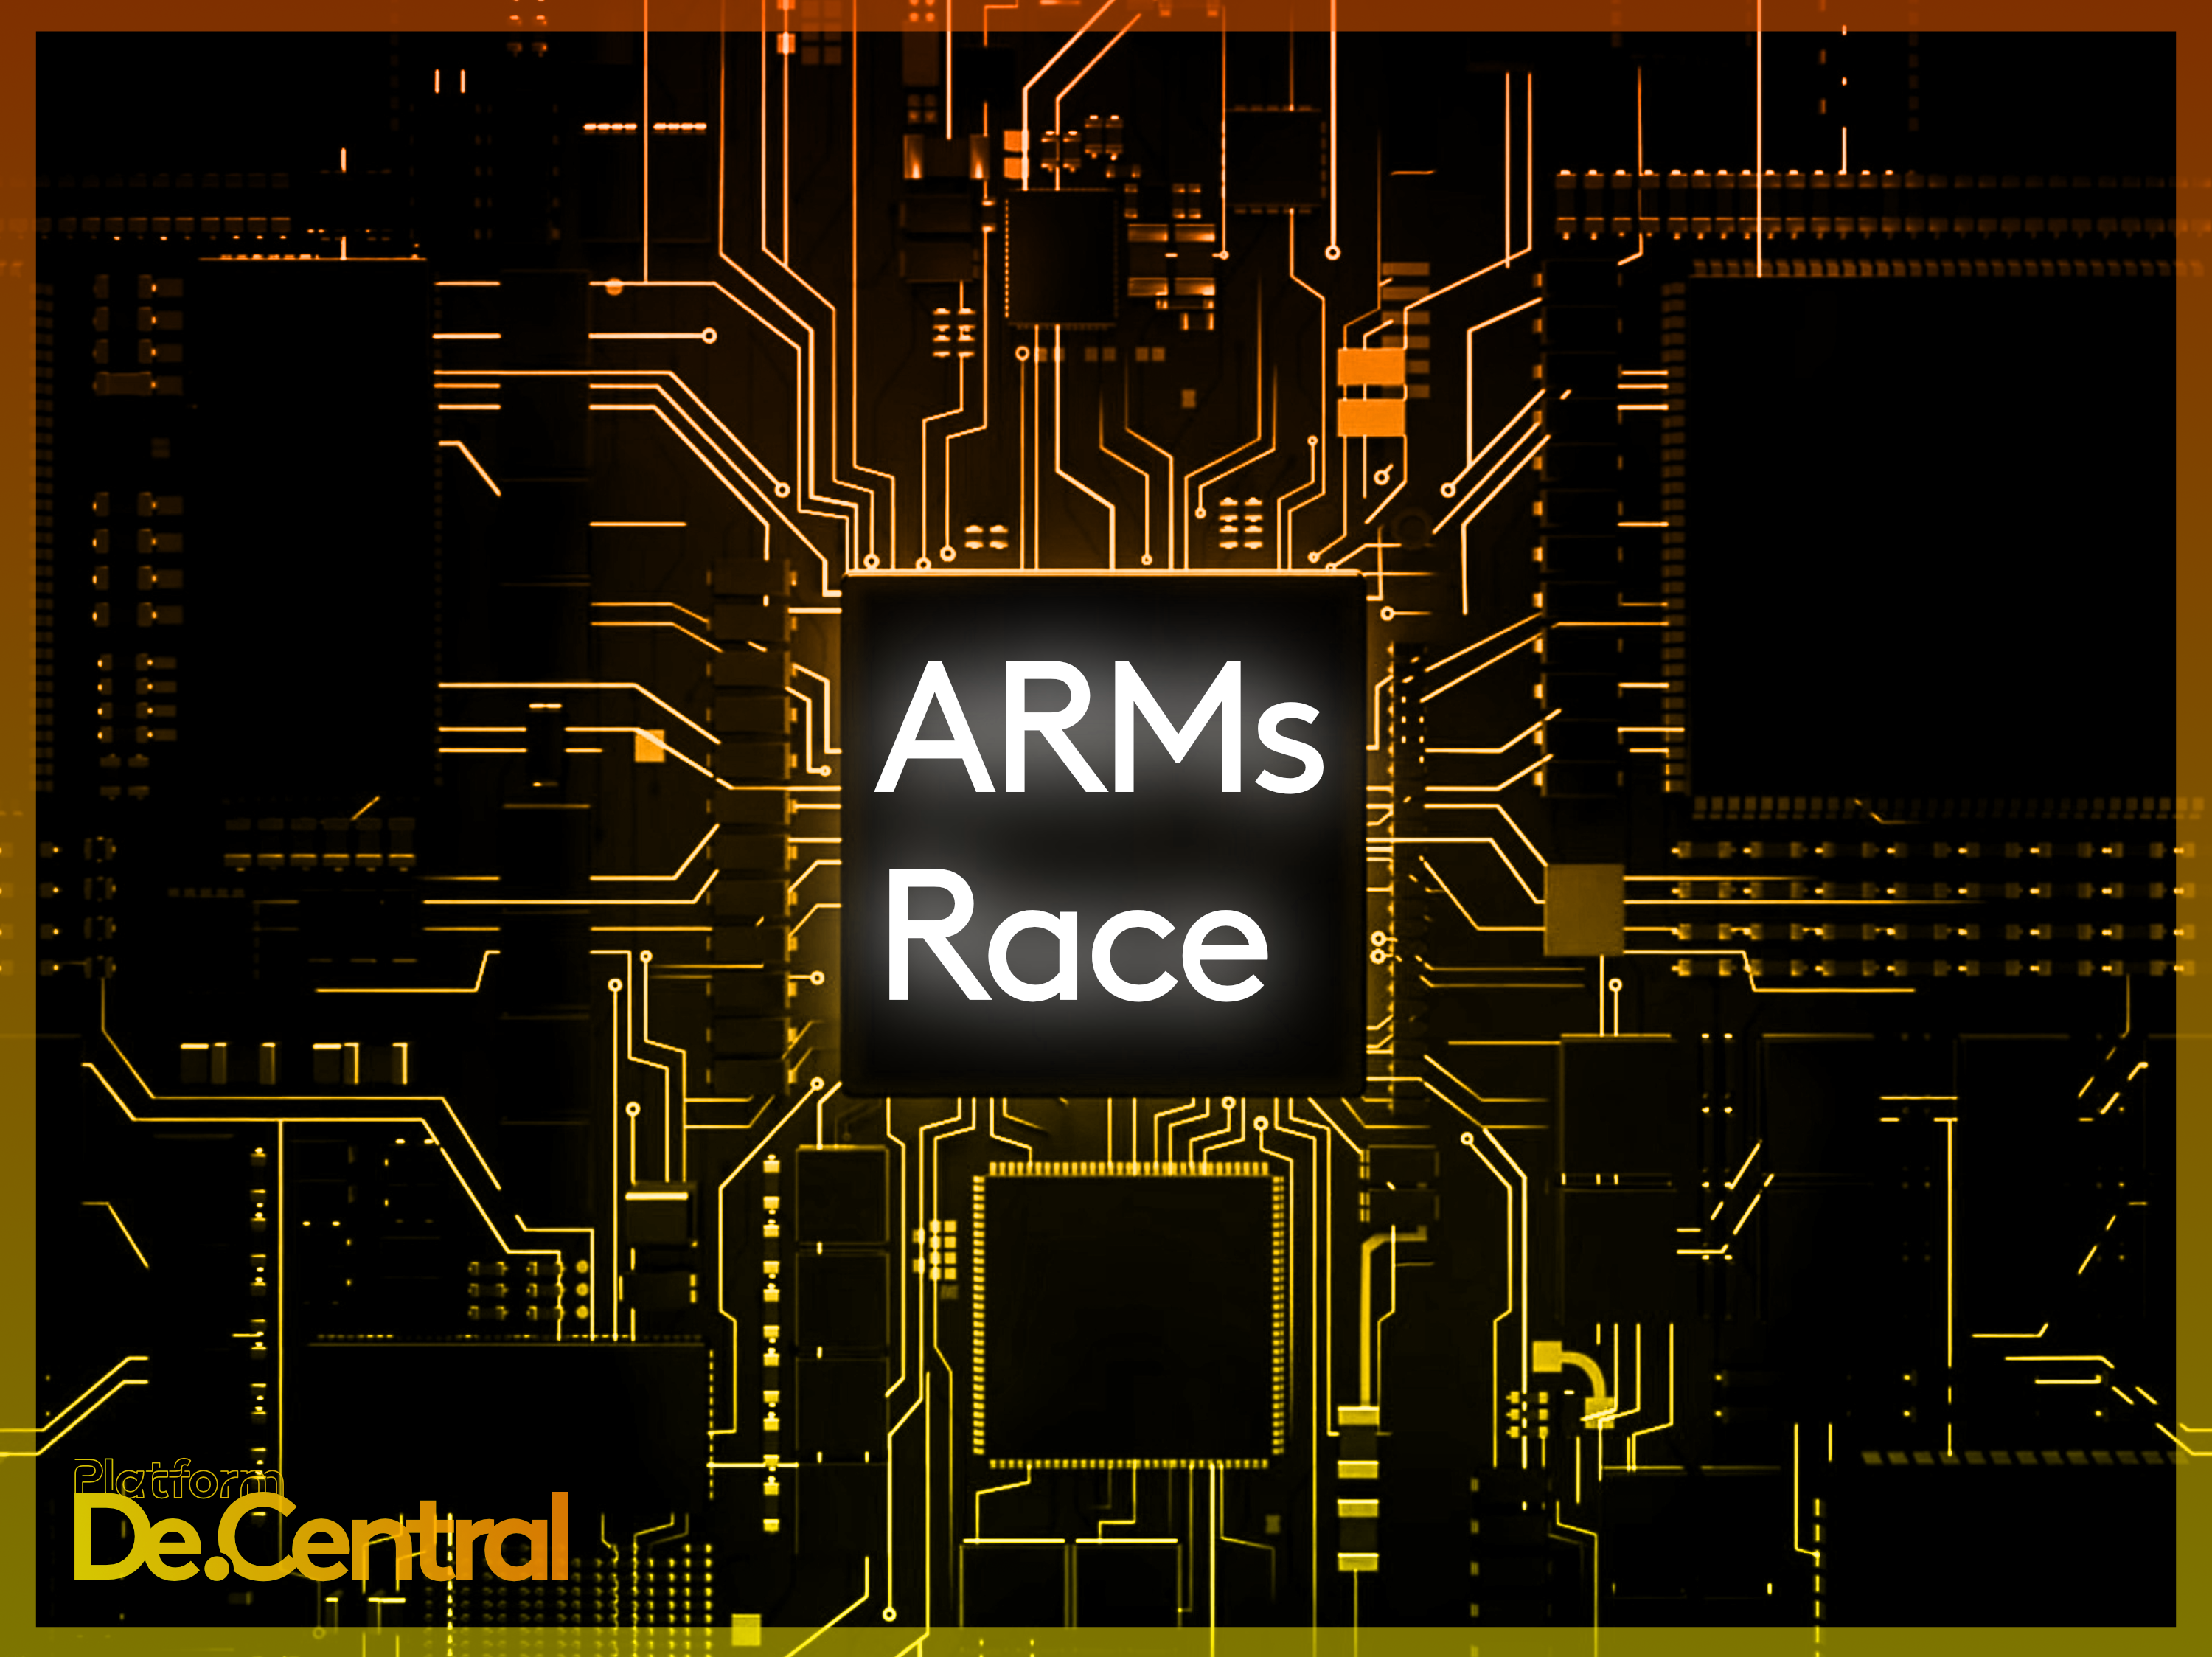 ARMs Race | Apple to announce ARM- based Macs at WWDC this month